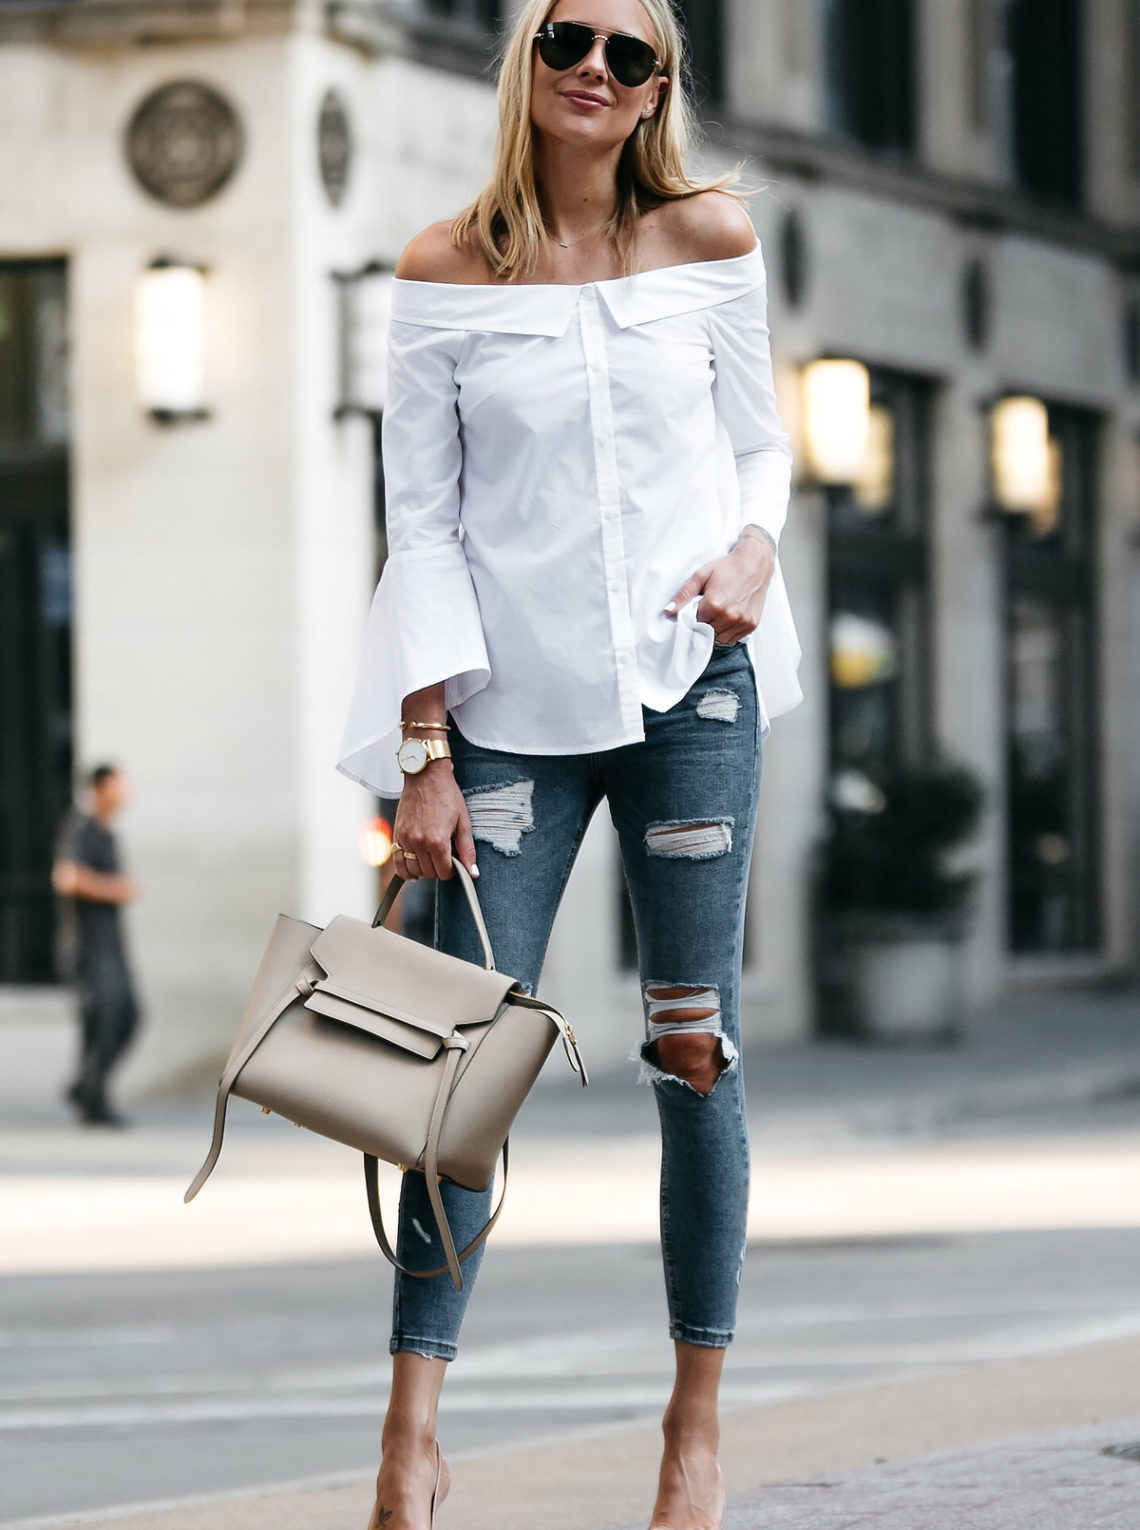 Blonde Woman Wearing Nordstrom Anniversary Sale White Bell-Sleeve off-the-shoulder Top Topshop Denim Ripped Skinny Jeans Outfit Christian Louboutin Nude Pumps Celine Belt Bag Celine Aviator Sunglasses Fashion Jackson Dallas Blogger Fashion Blogger Street Style